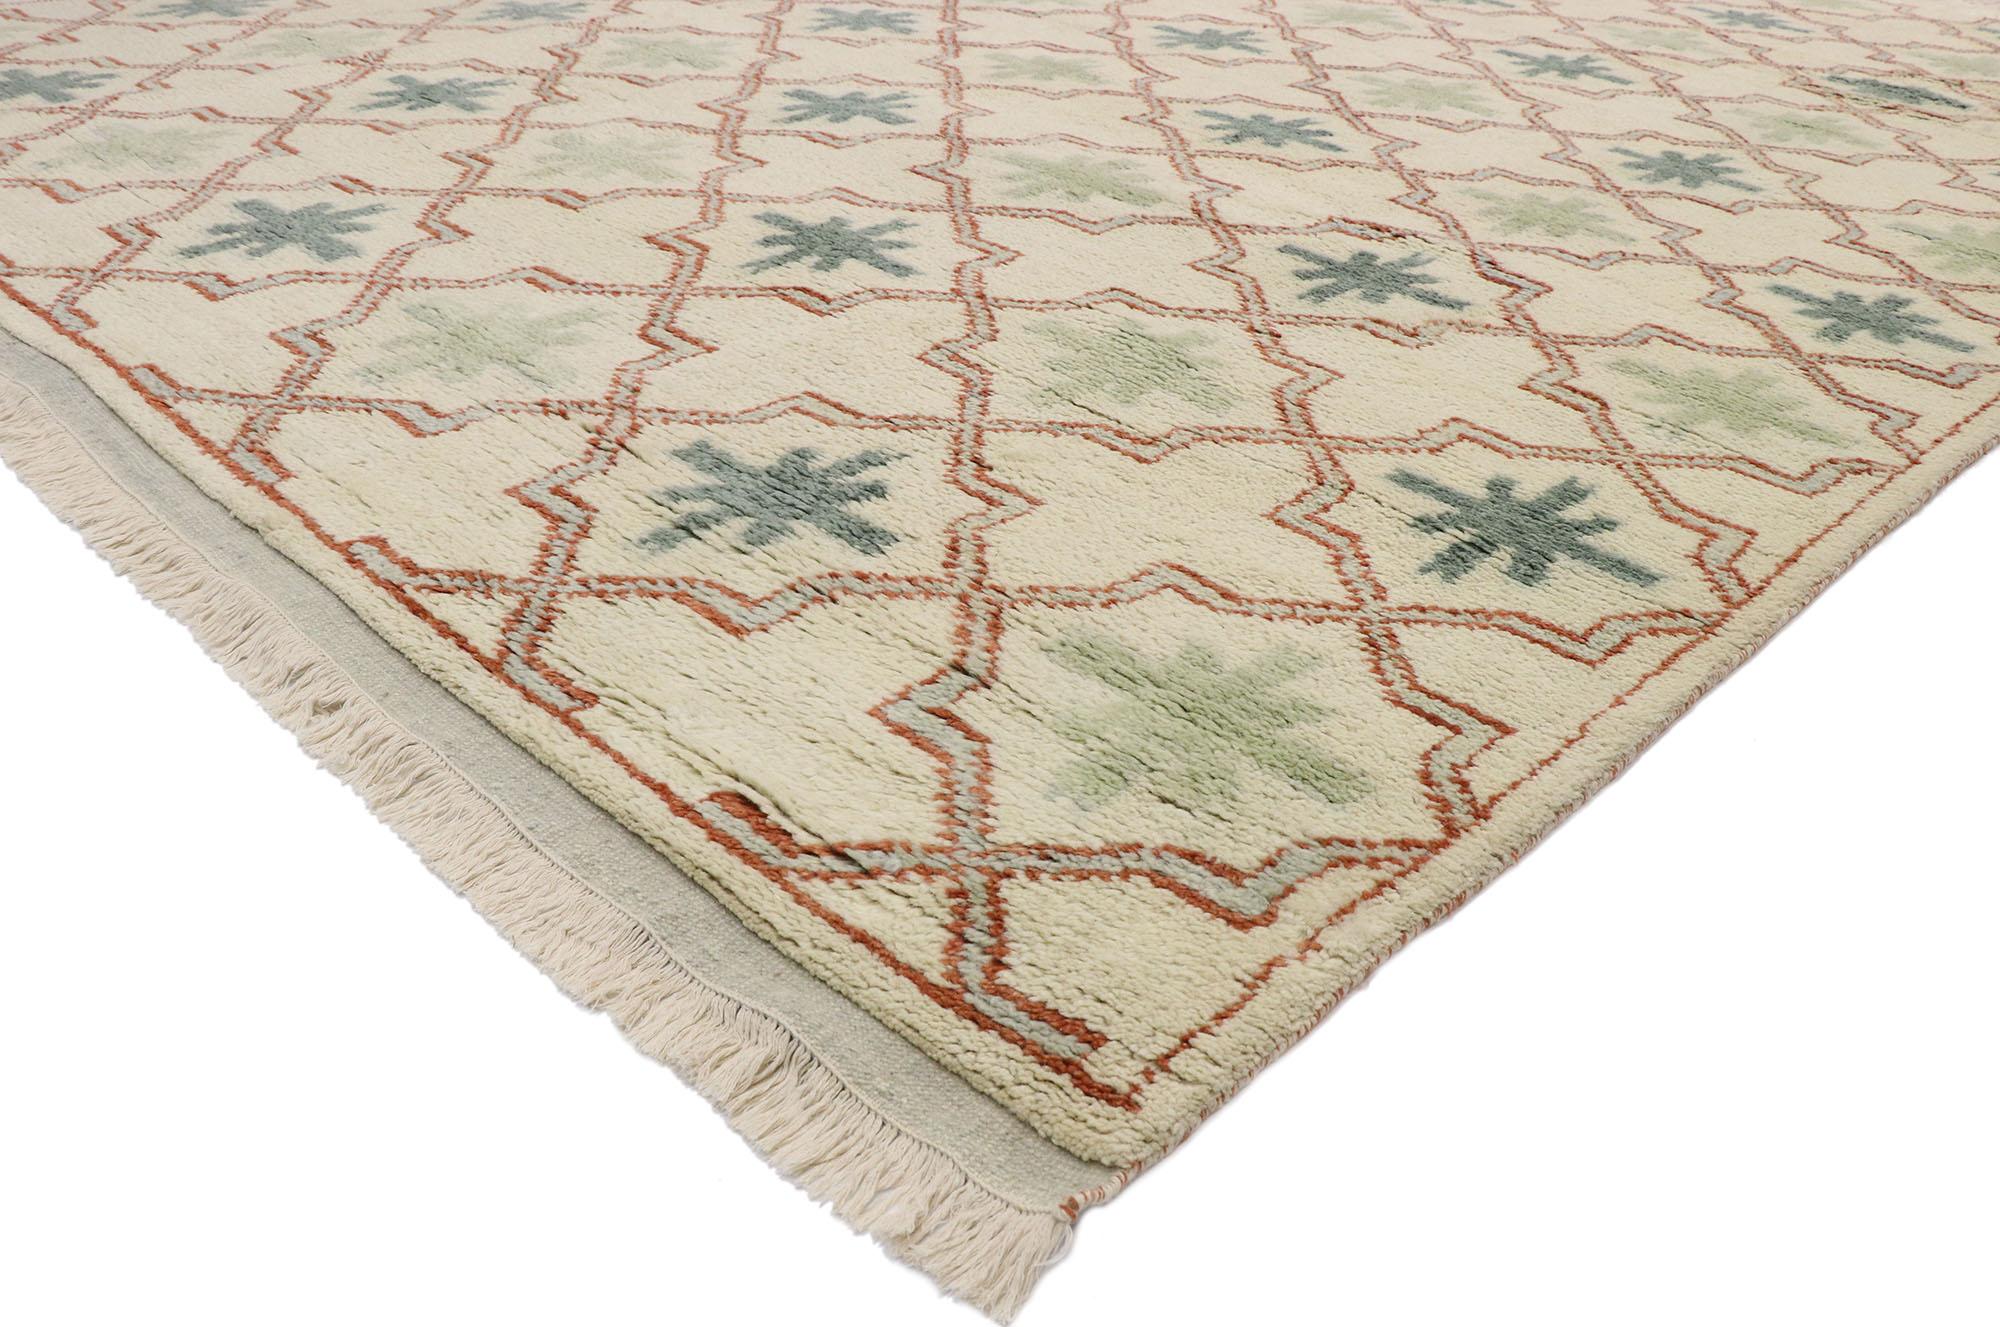 30576 new contemporary Moroccan rug with modern Mediterranean style. This hand knotted wool new contemporary Moroccan rug features an all-over tessellated pattern spread across an abrashed vanilla field. The pattern is comprised of cross-shaped